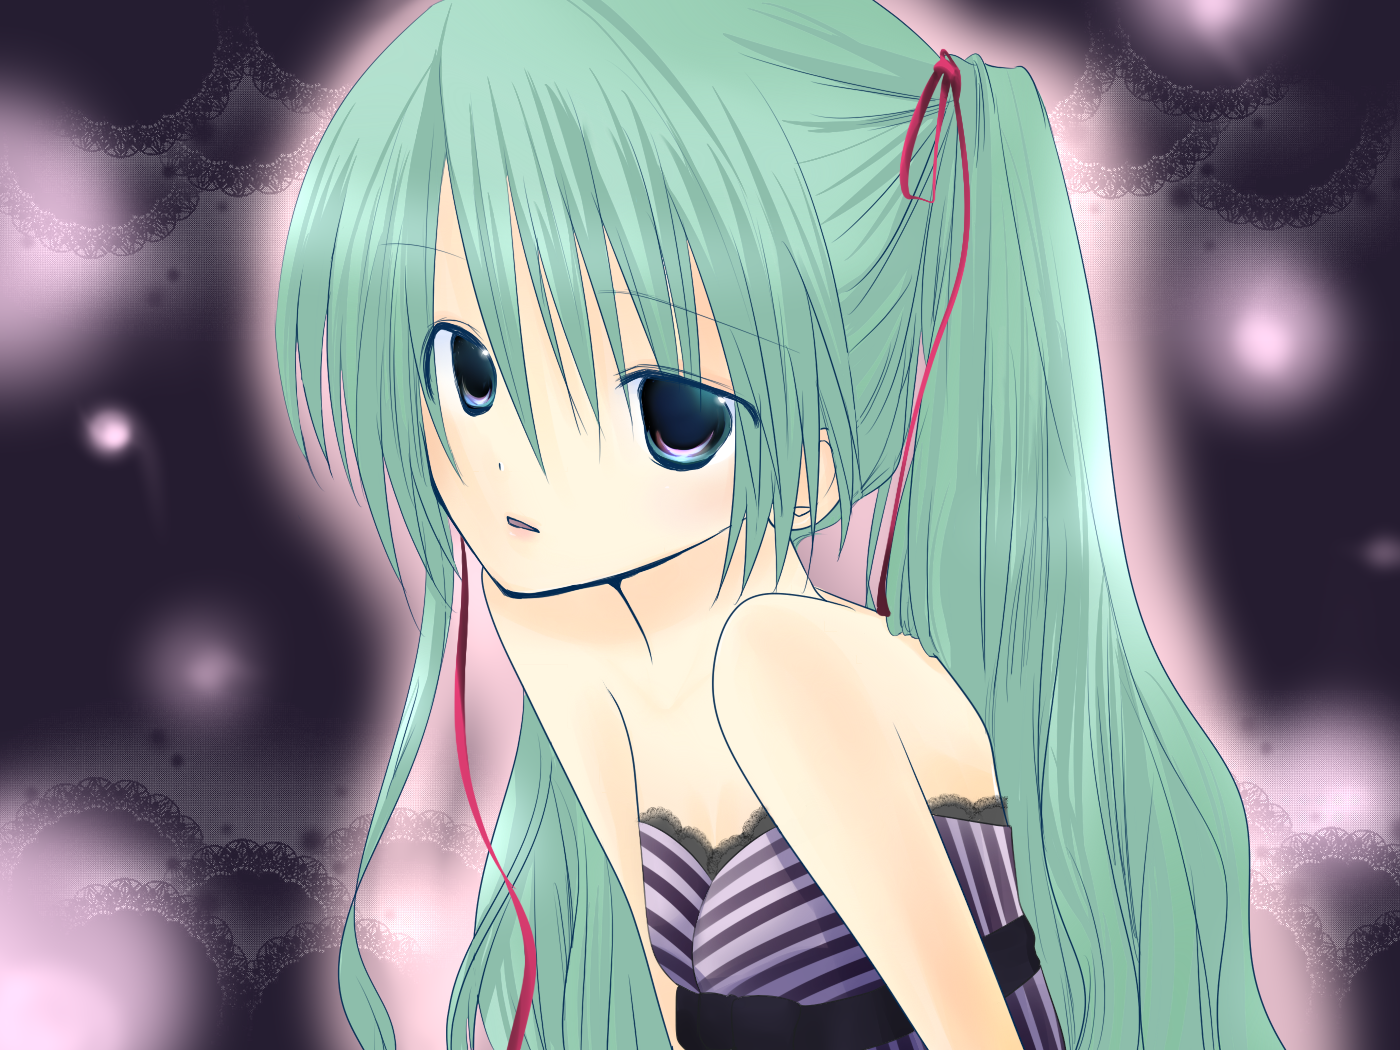 Smiling Hatsune Miku with colorful background